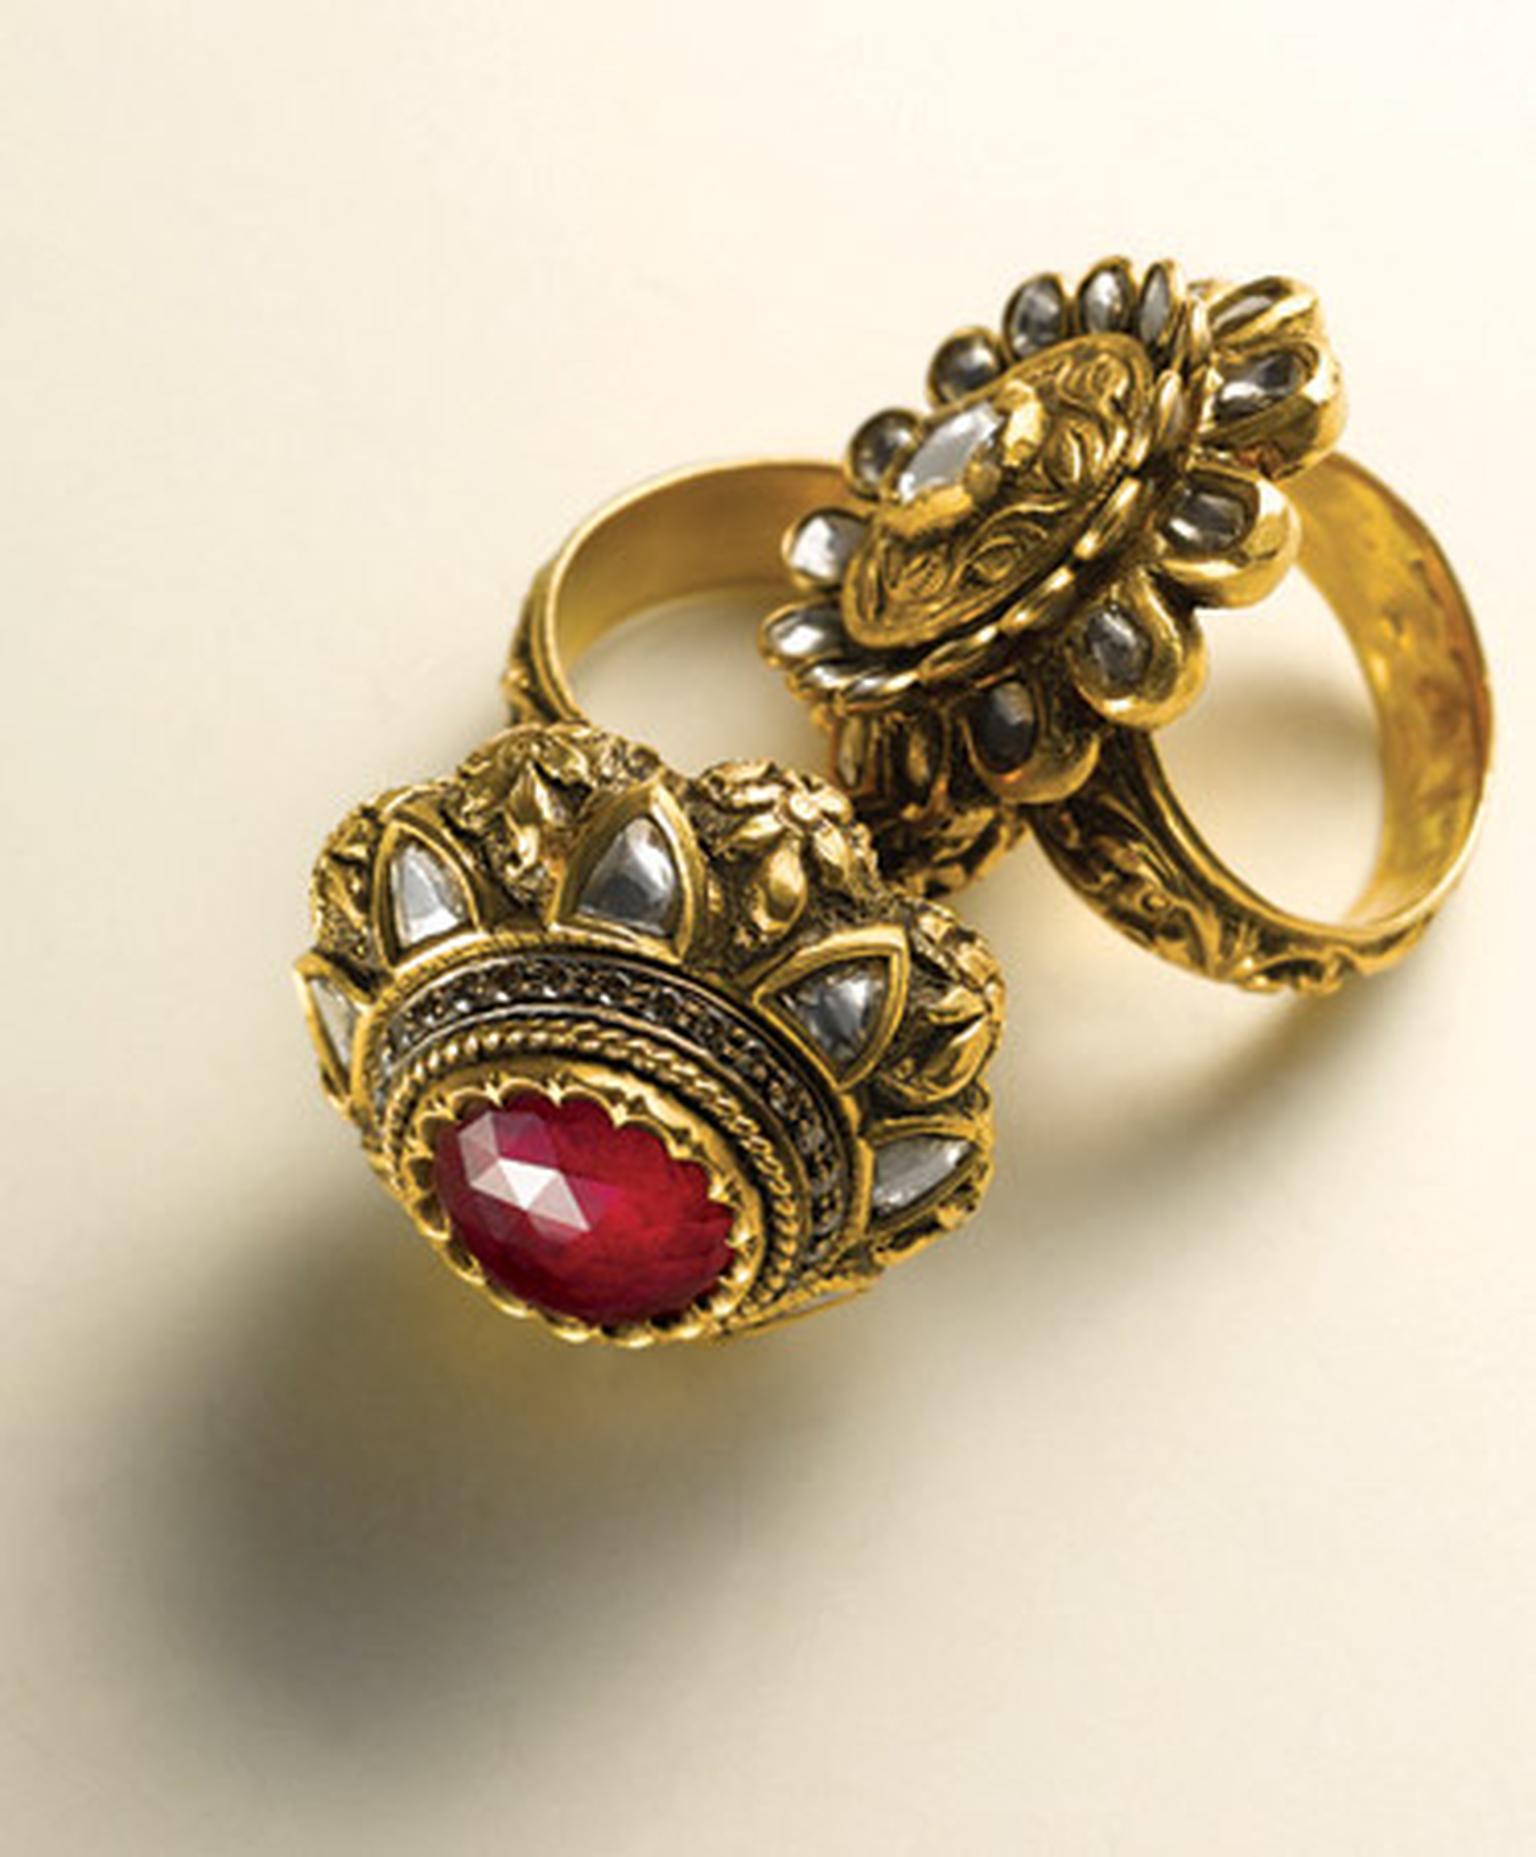 Zoya-13--Rings-from-Rajasthan-collection